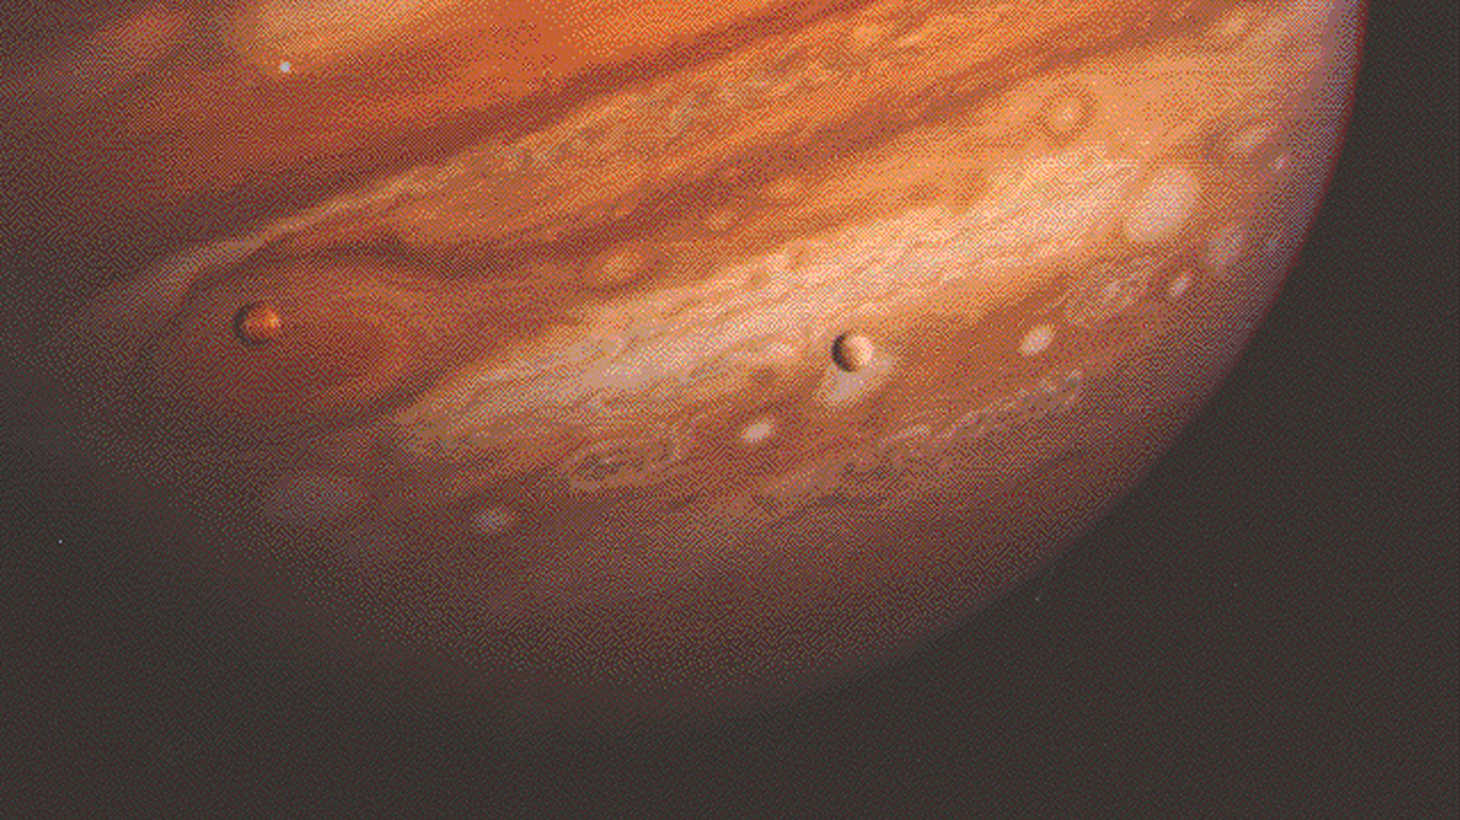 This is an image taken by one of the Voyager spacecraft a few years into its mission to explore the outer planets. It shows Jupiter with some of its moons in the foreground.